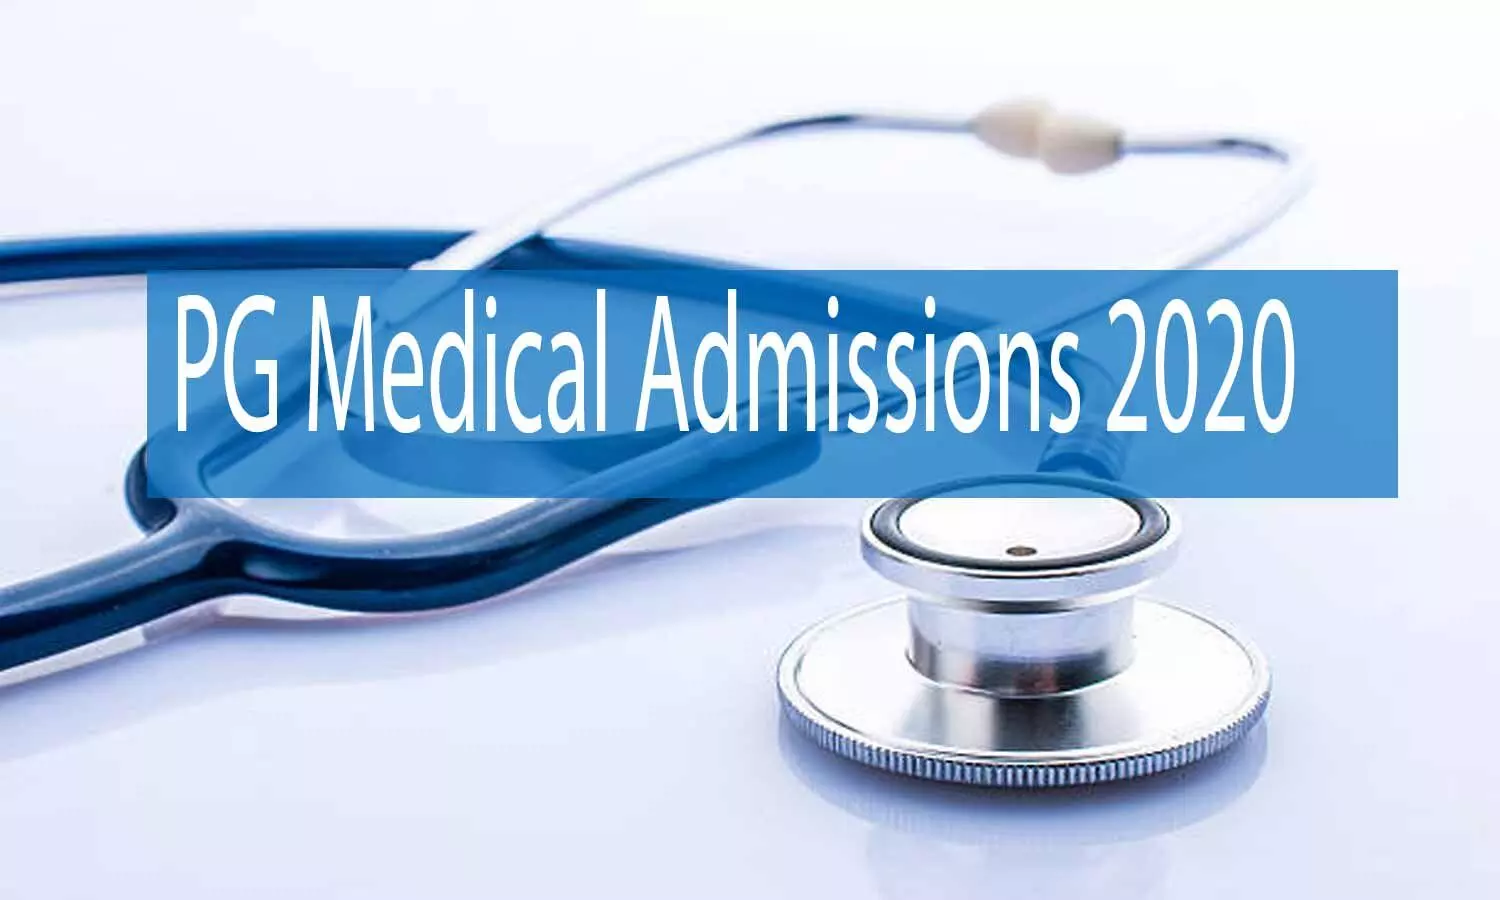 PG Medical Admissions: TN Health releases prospectus, tentative counselling schedule for extended mop up round